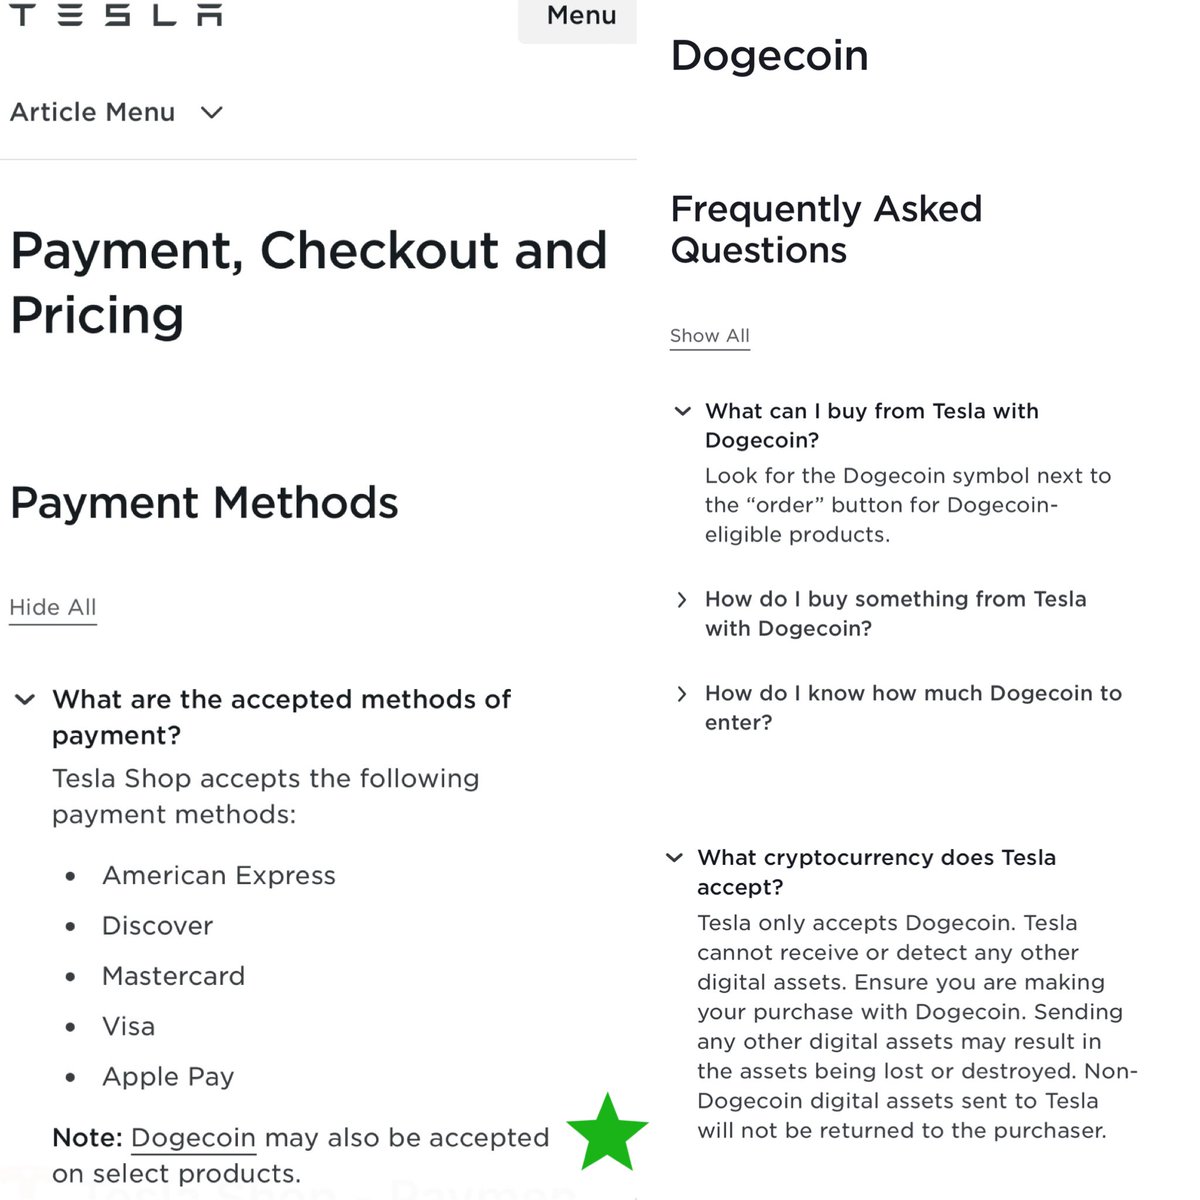 I see people buzzing about #Tesla updating its payment options to include #Dogecoin as a crypto What changes are different?